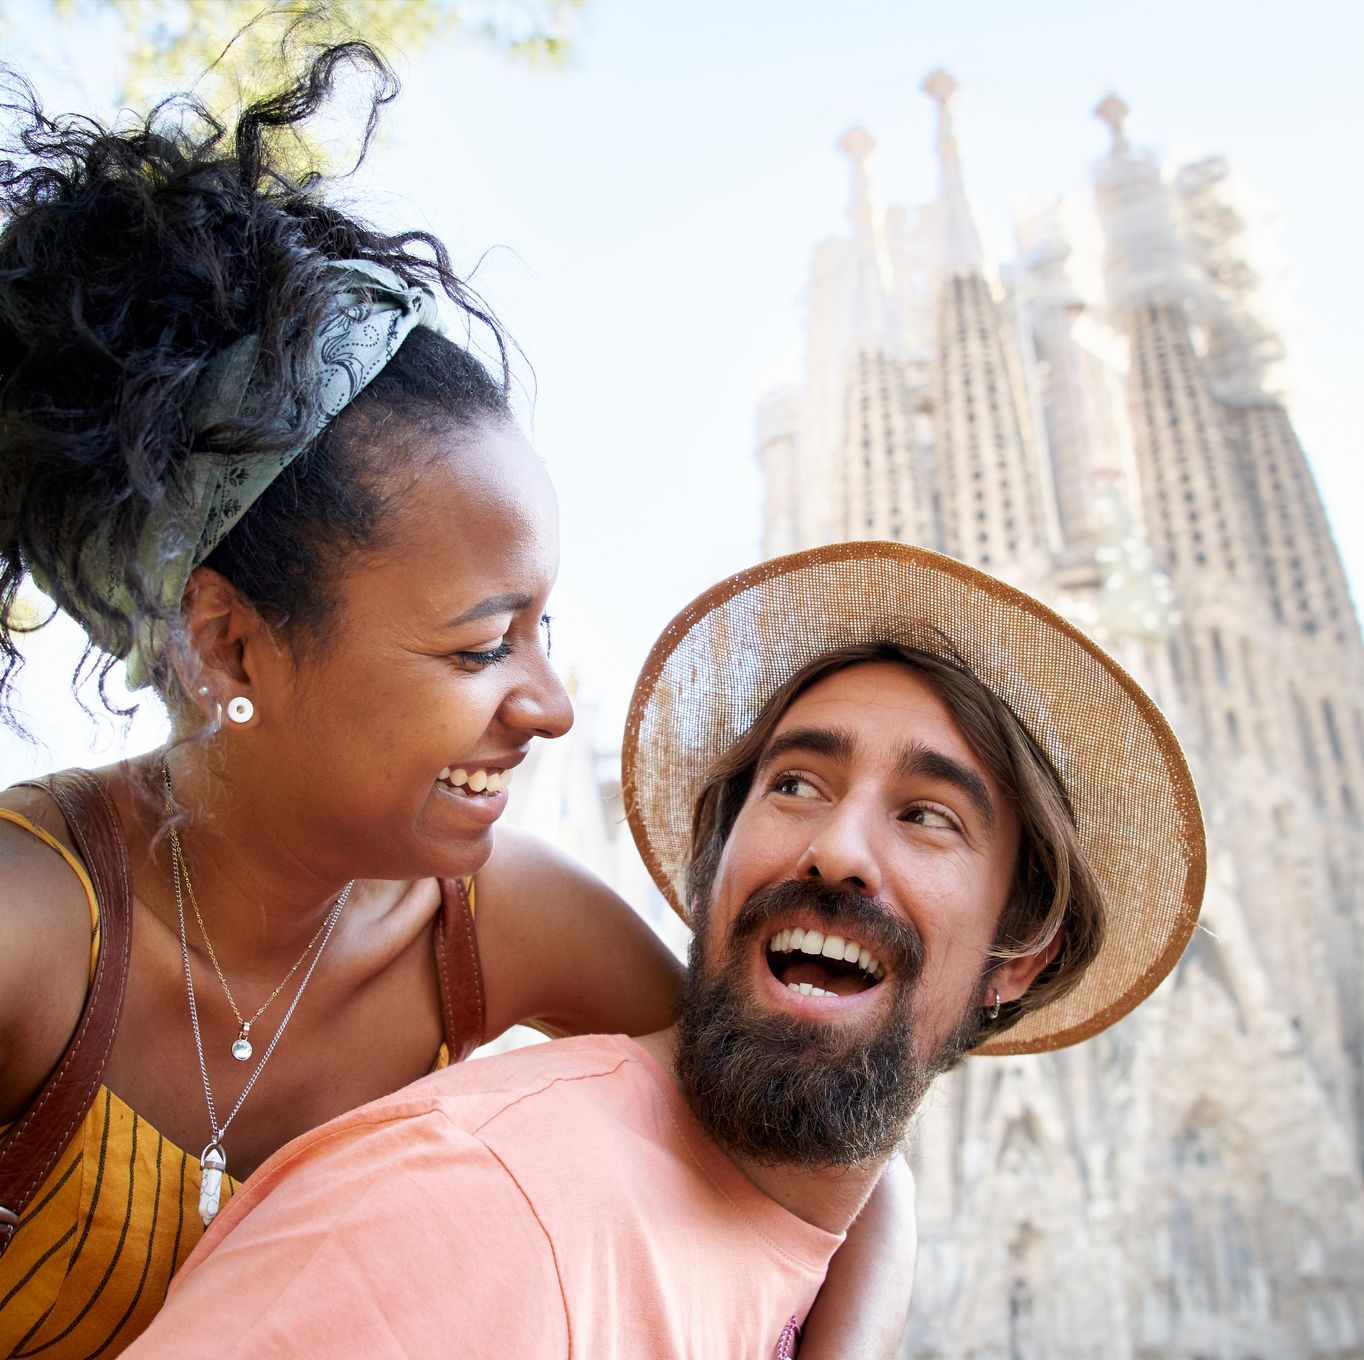 Worried About a Honeymoon Fund Seeming Tacky? Here's How to Set One Up the Right Way